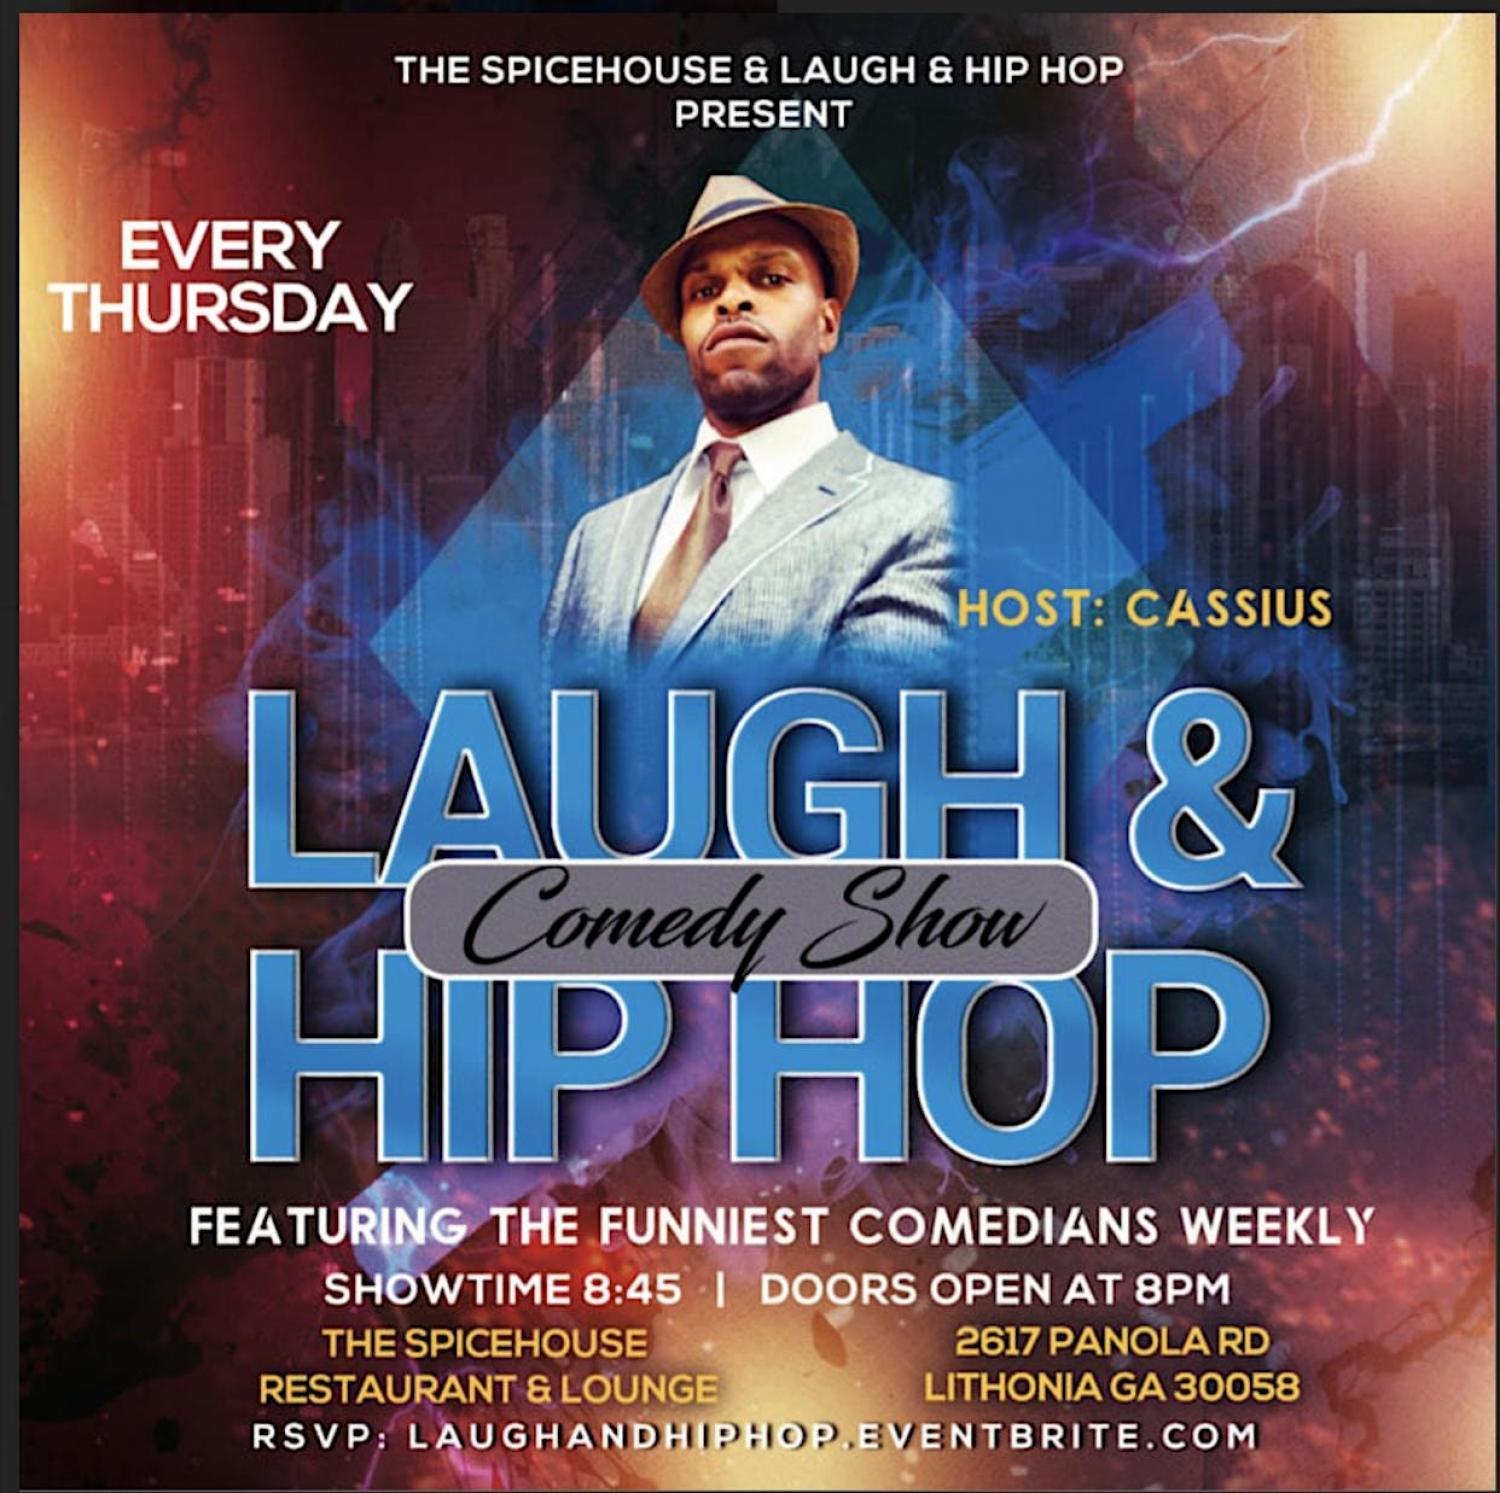 LAUGH & HIP HOP COMEDY SHOW at The Spicehouse * free
Thu Nov 24, 7:00 PM - Thu Nov 24, 10:00 PM
in 37 days